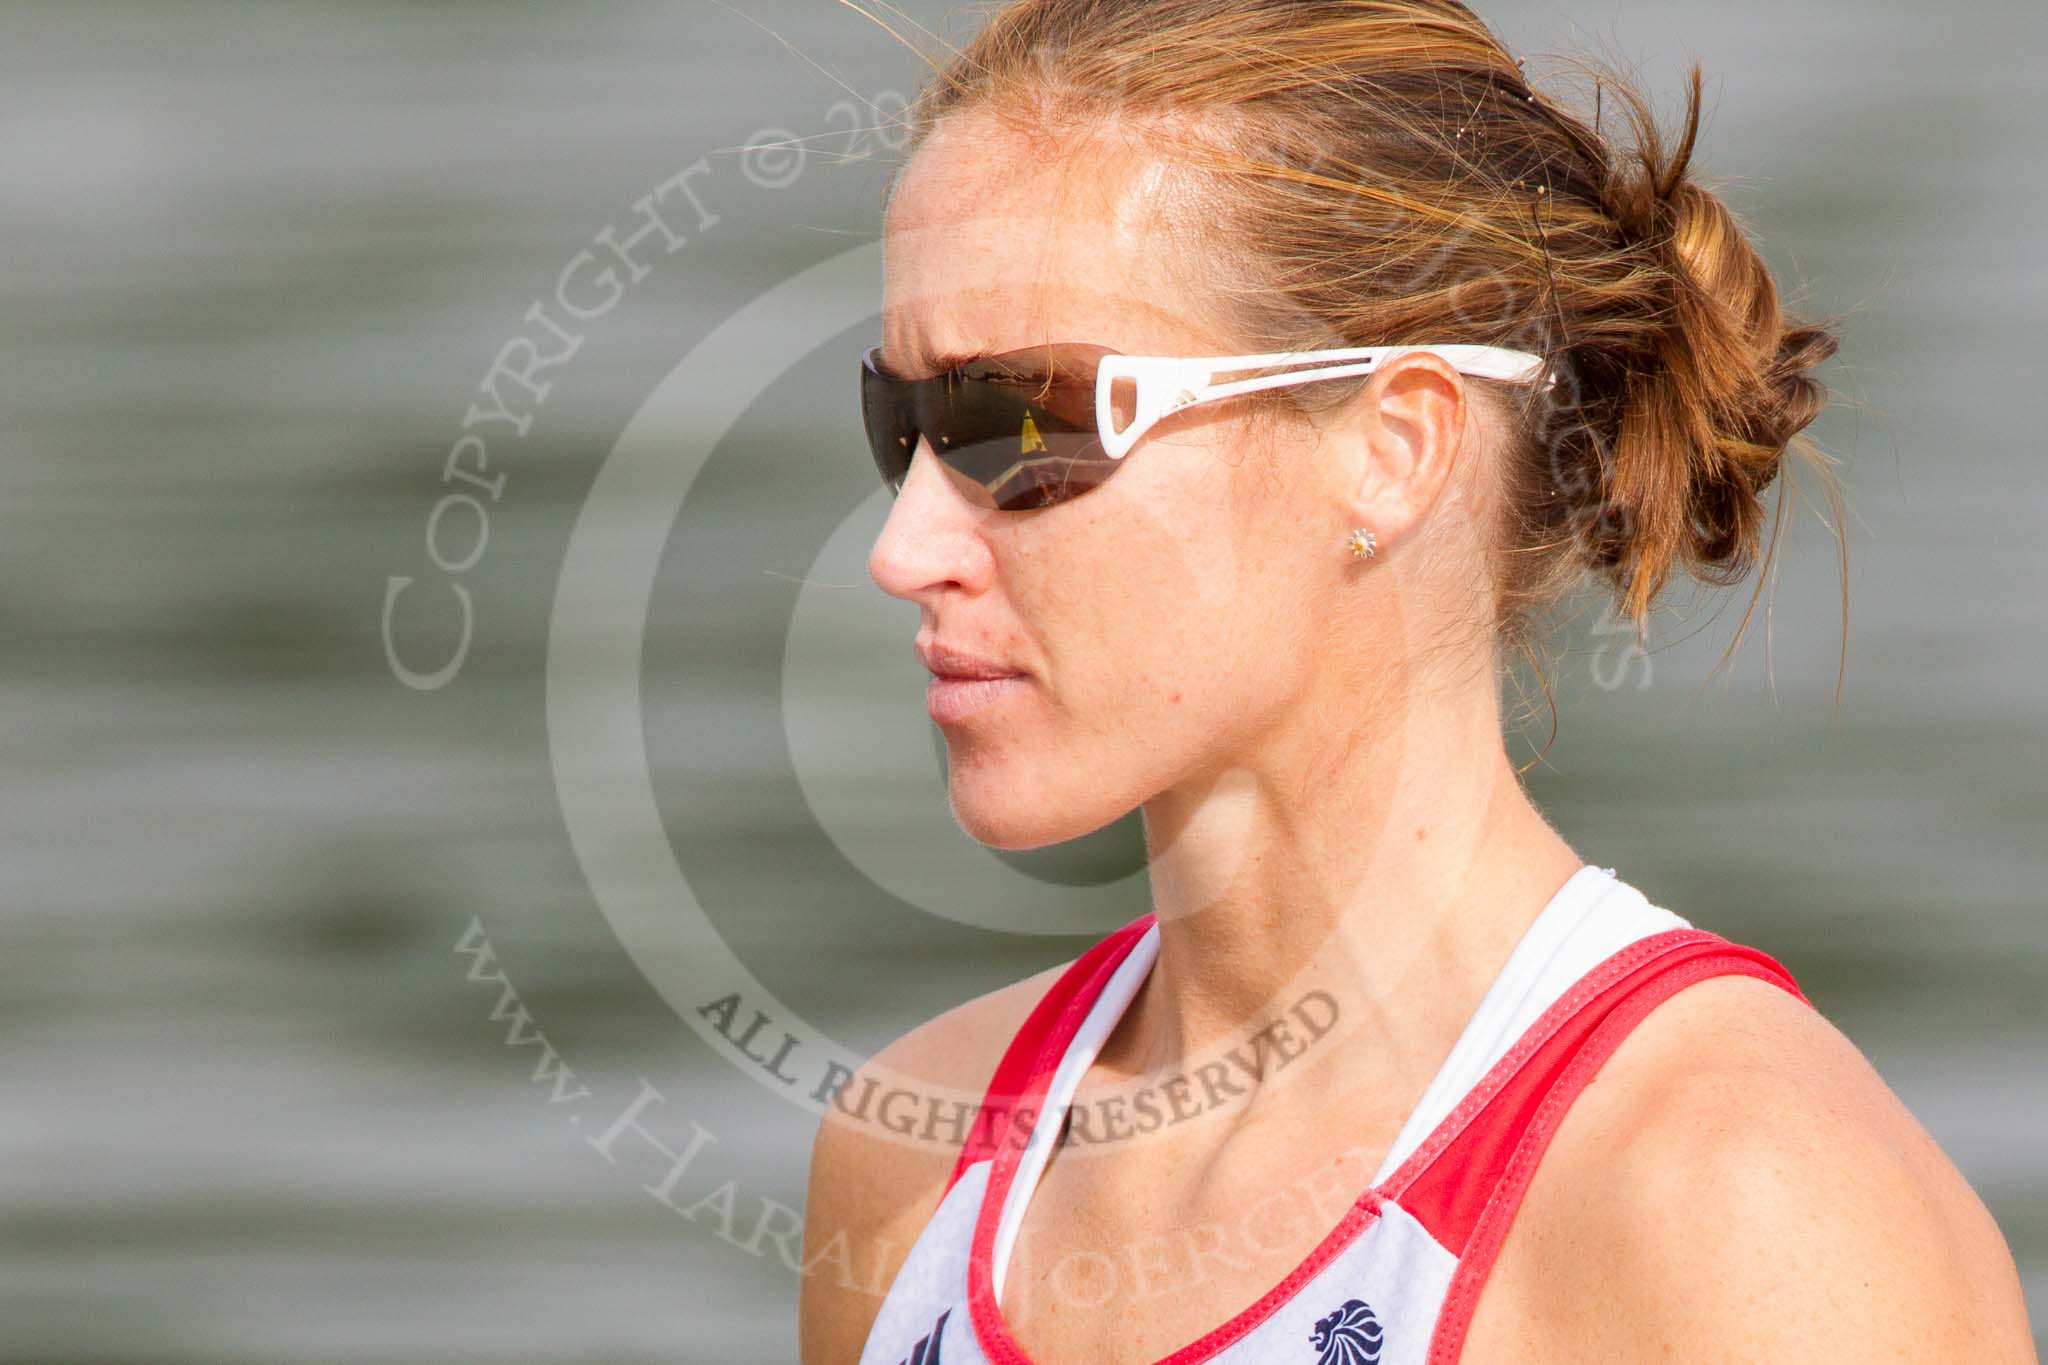 Henley Royal Regatta 2013, Saturday: Leander Club and Minerva Bath Rowing Club during a training session in the morning: Stroke Helen Glover. Image #34, 06 July 2013 09:02 River Thames, Henley on Thames, UK